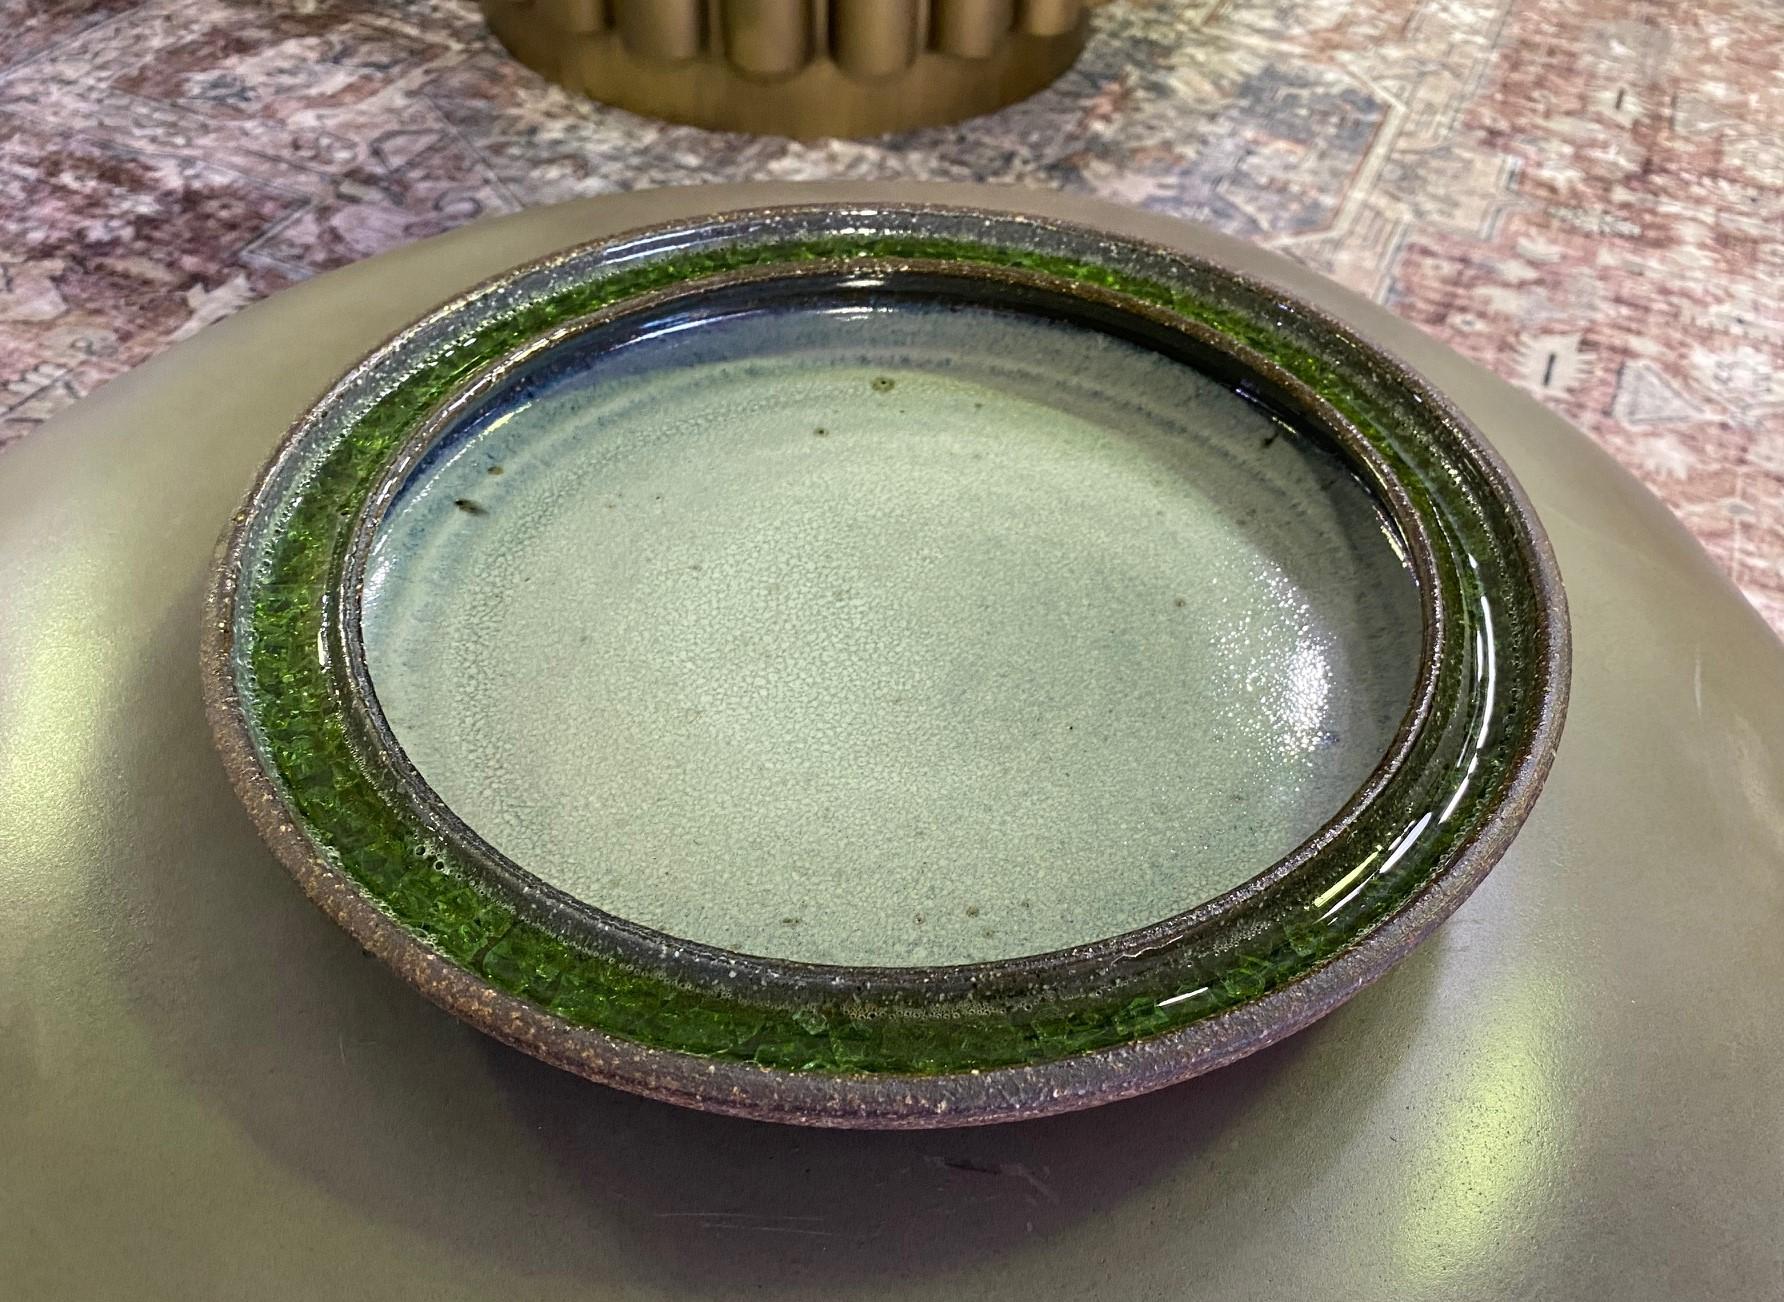 A wonderfully made and colored heavy bowl by Mexican born ceramic master Raul Coronel who played an important role in the American (he became a naturalized citizen) / California design movement of the 1950s-1970s alongside Peter Voulkos, Beatrice